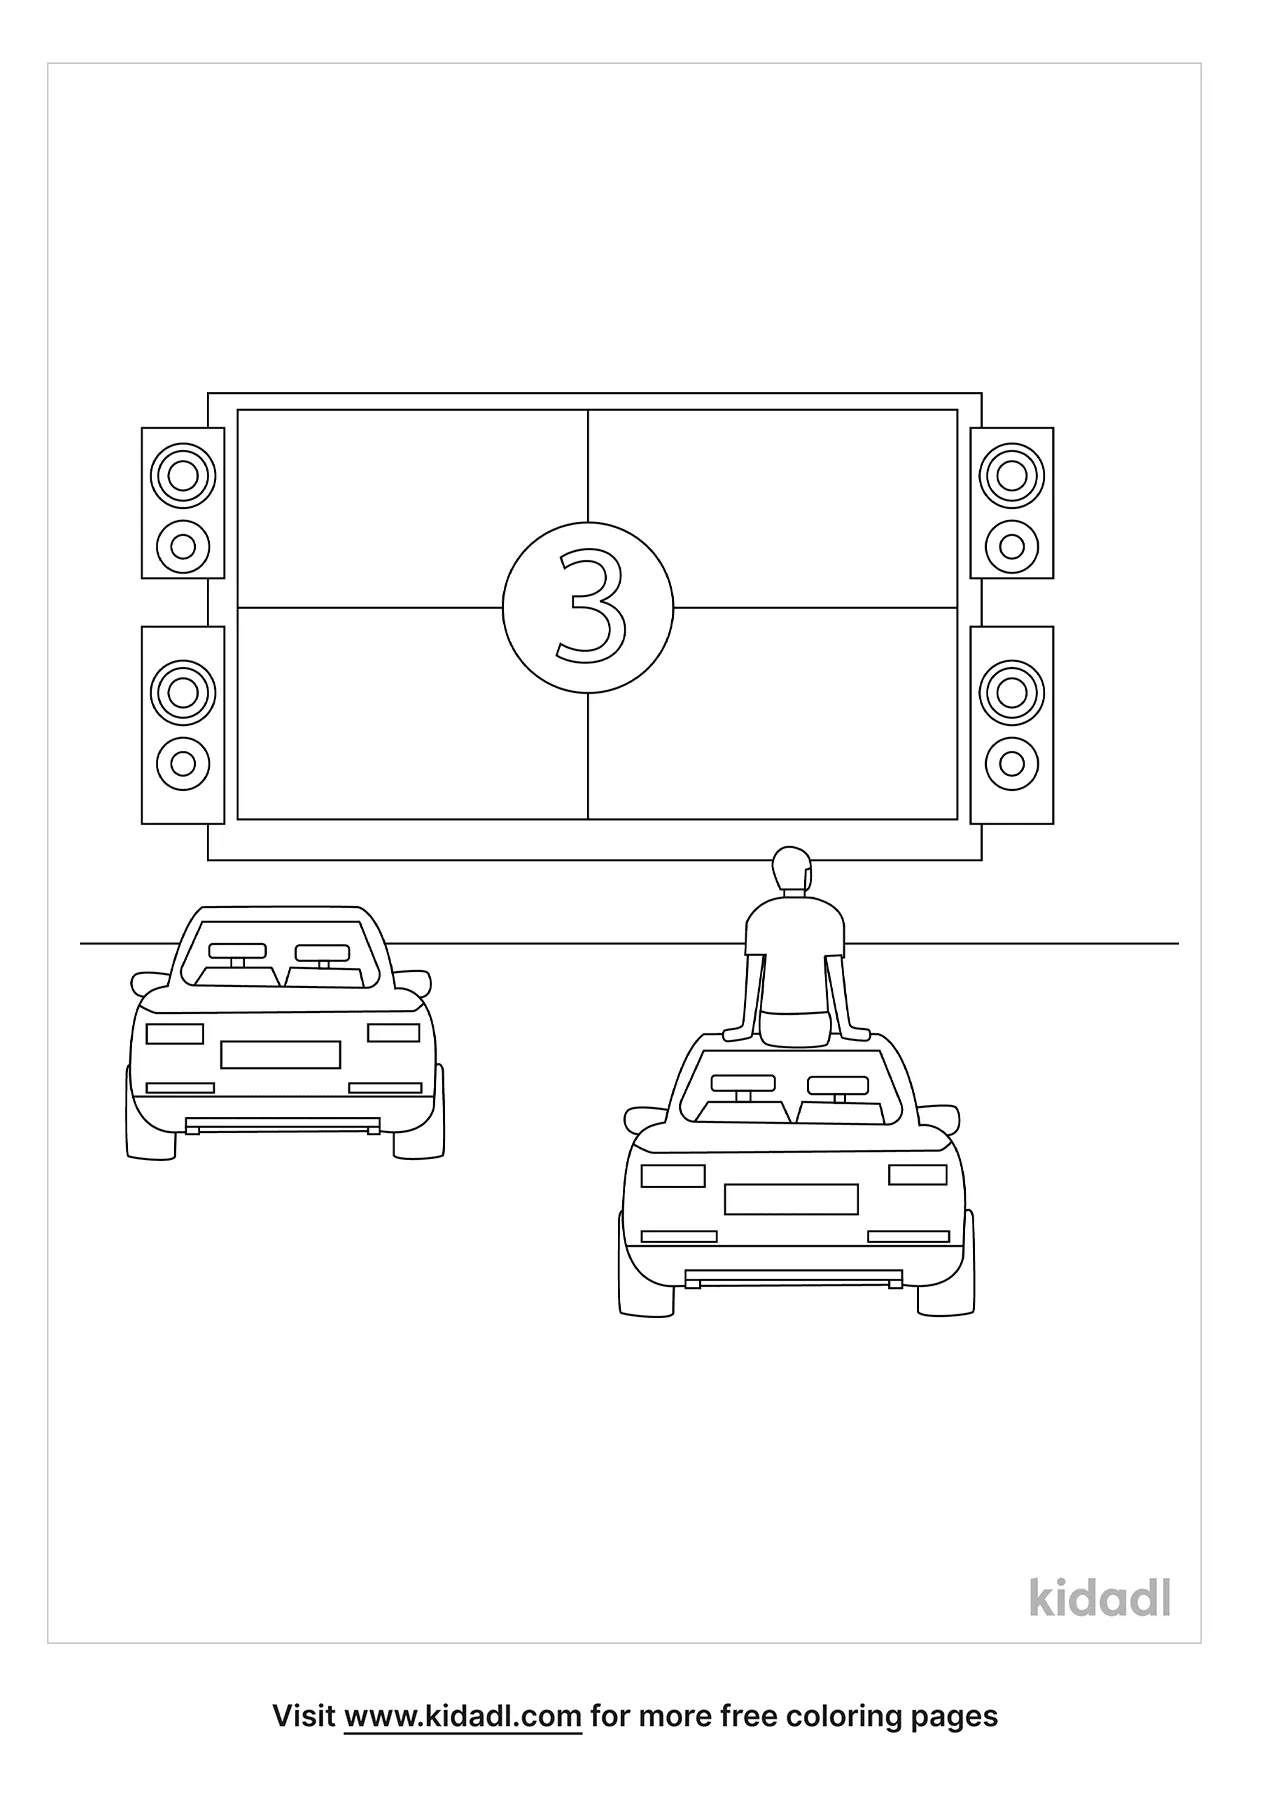 Drive-In Movie Coloring Page